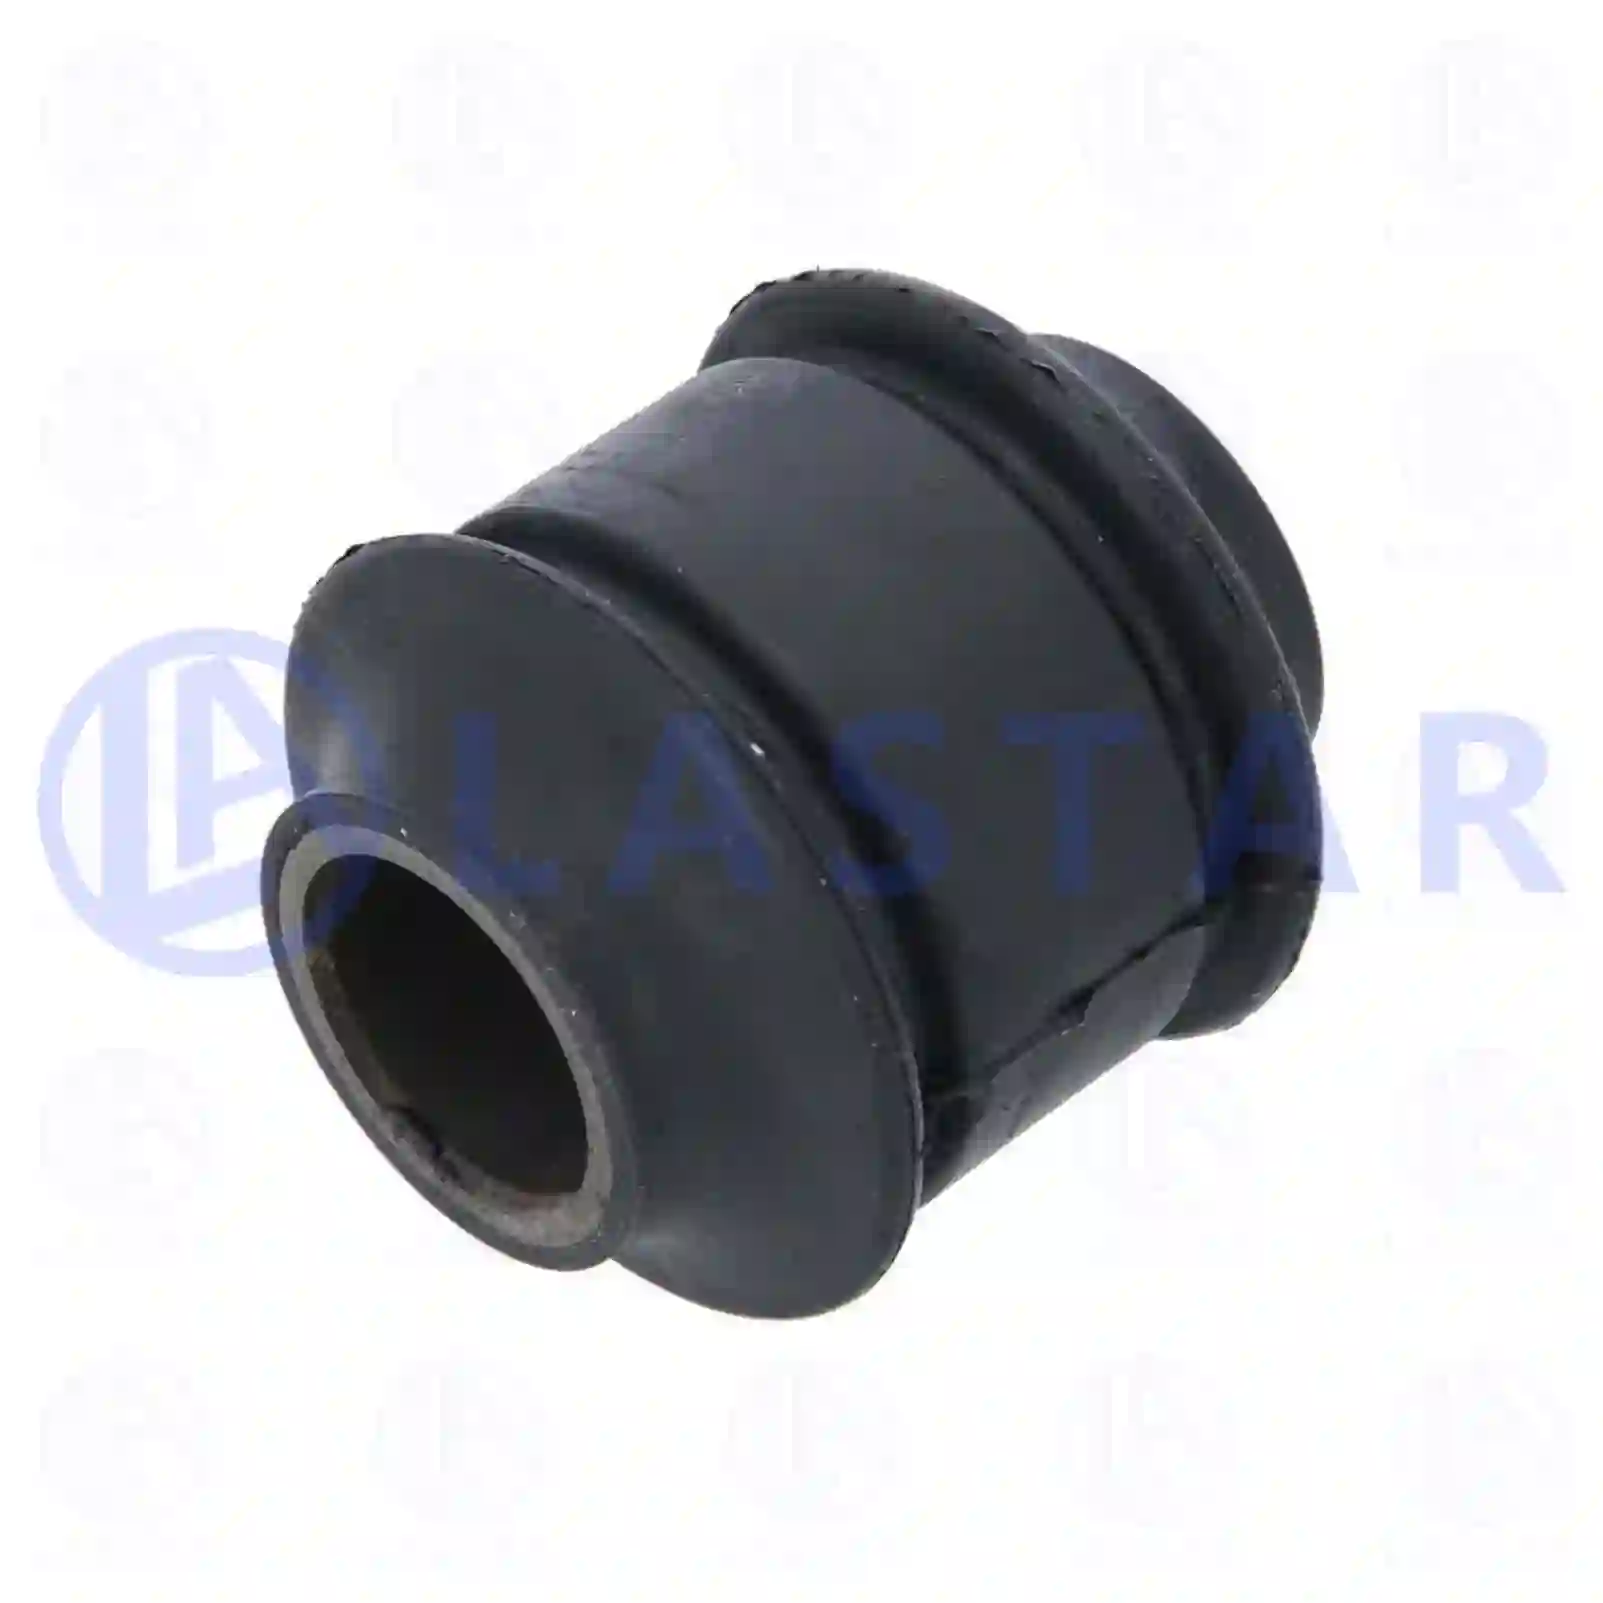 Rubber bushing, shock absorber, 77729635, 3090934, , , ||  77729635 Lastar Spare Part | Truck Spare Parts, Auotomotive Spare Parts Rubber bushing, shock absorber, 77729635, 3090934, , , ||  77729635 Lastar Spare Part | Truck Spare Parts, Auotomotive Spare Parts